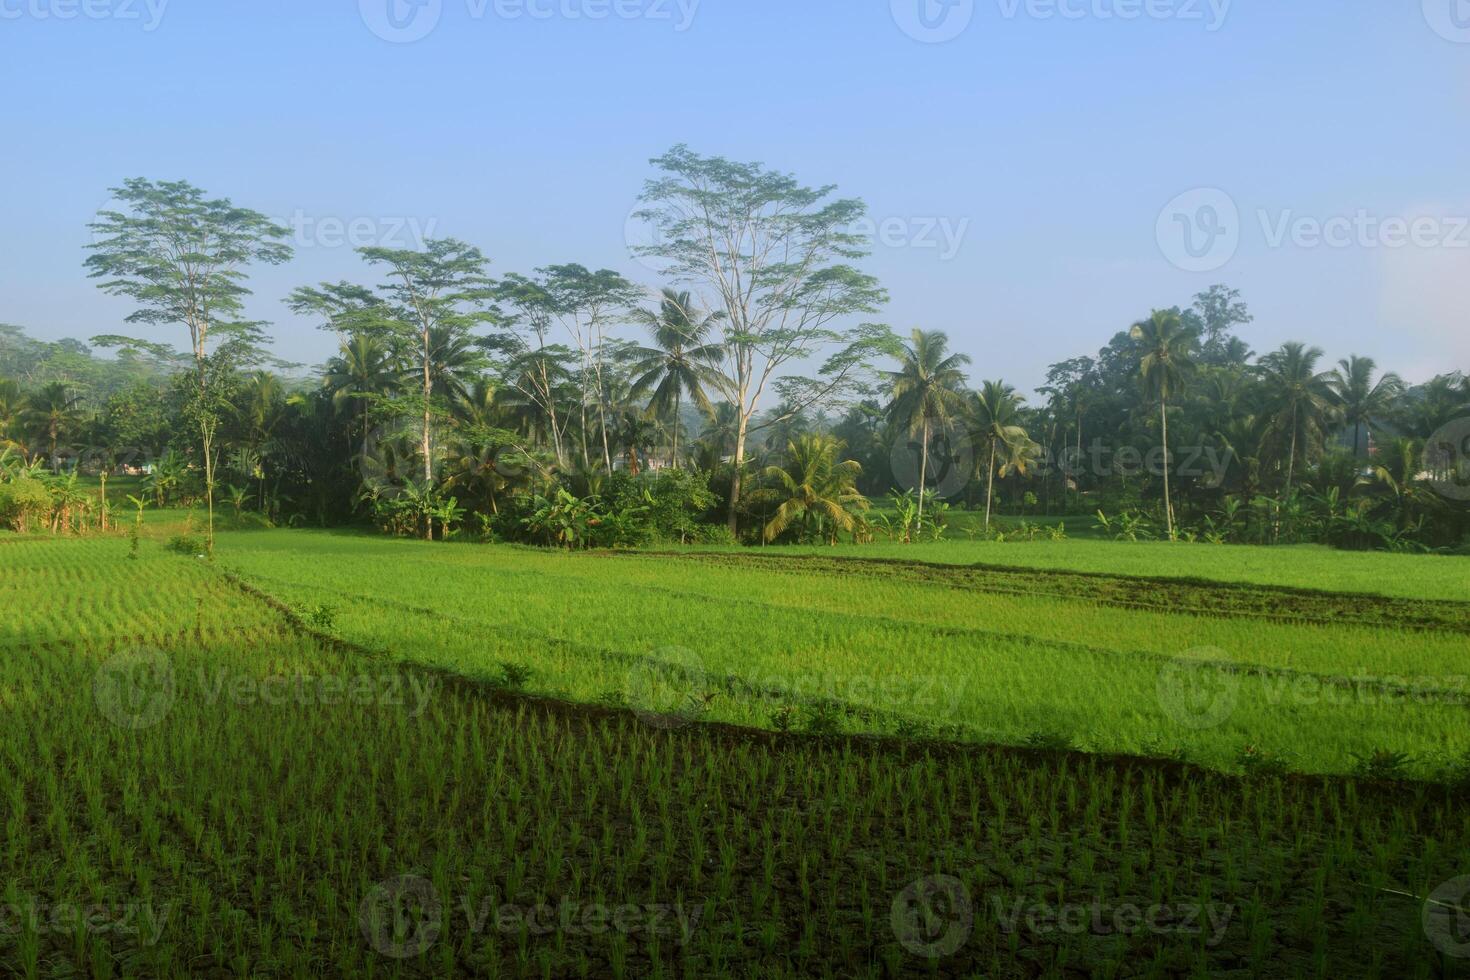 The atmosphere of the green rice fields in the very beautiful village photo